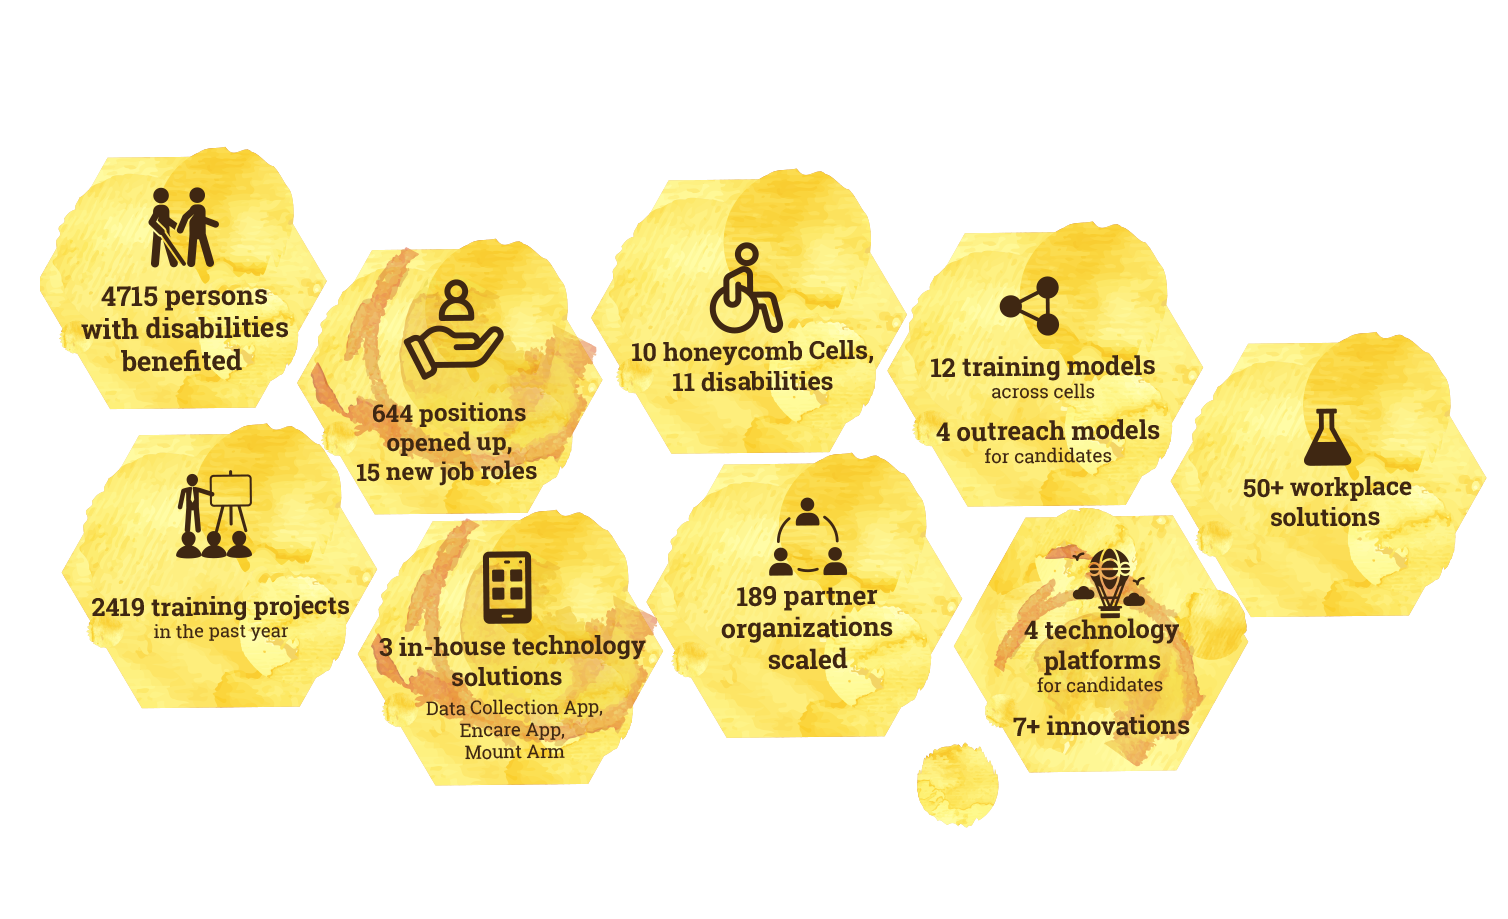 4715 persons with disabilities benefited; 644 positions opened up, 15 new job roles; 2419 training projects in the past year; 3 in-house technology solutions - Data Collection App, Encare App,  Mount Arm; 10 honeycomb Cells, 11 disabilities; 189 partner organizations scaled; 12 training models across cells; 4 outreach models for candidates; 4 technology platforms for candidates; 7+ innovations; 50+ workplace solutions 